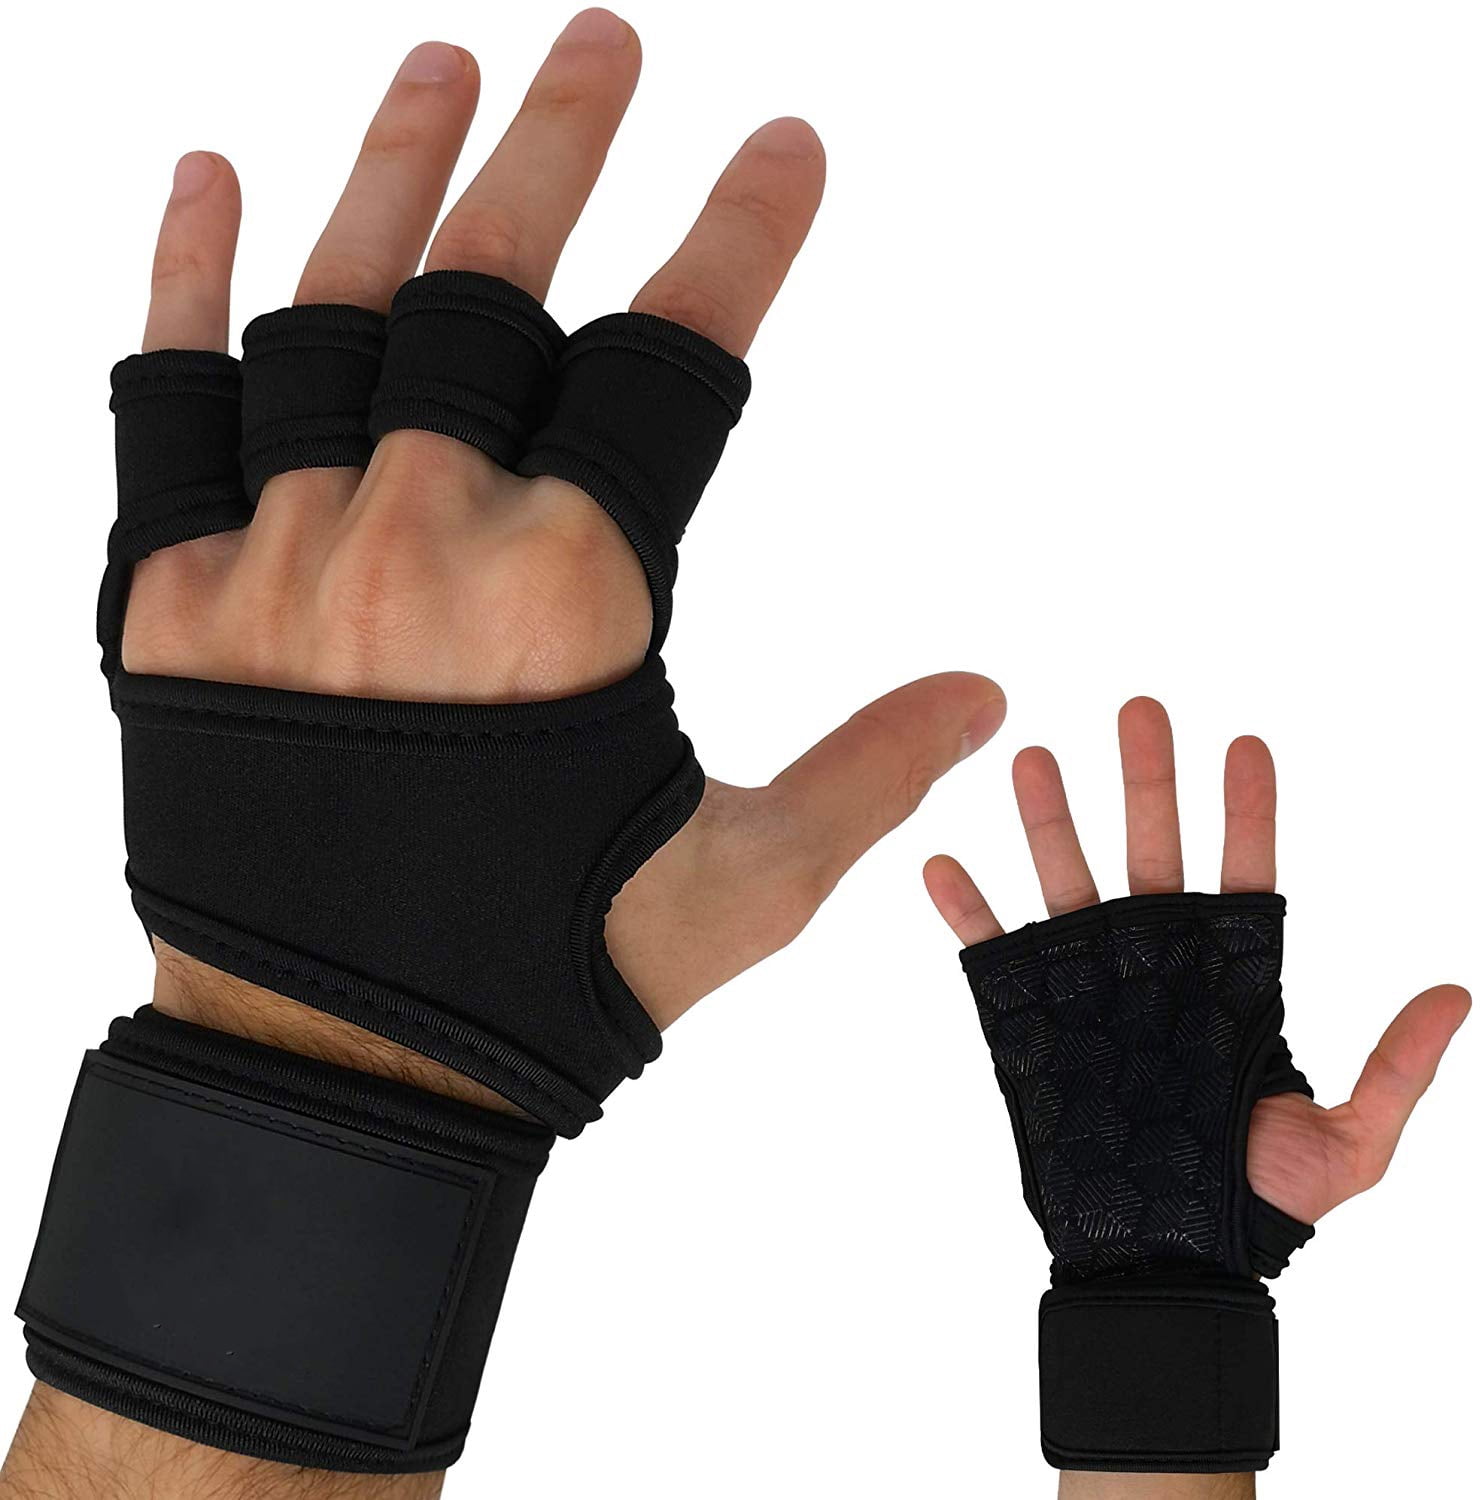 LIFTING GRIPS Palm Protector Lifting Strap TOPS Gym Gloves Hand Grip Protectors 